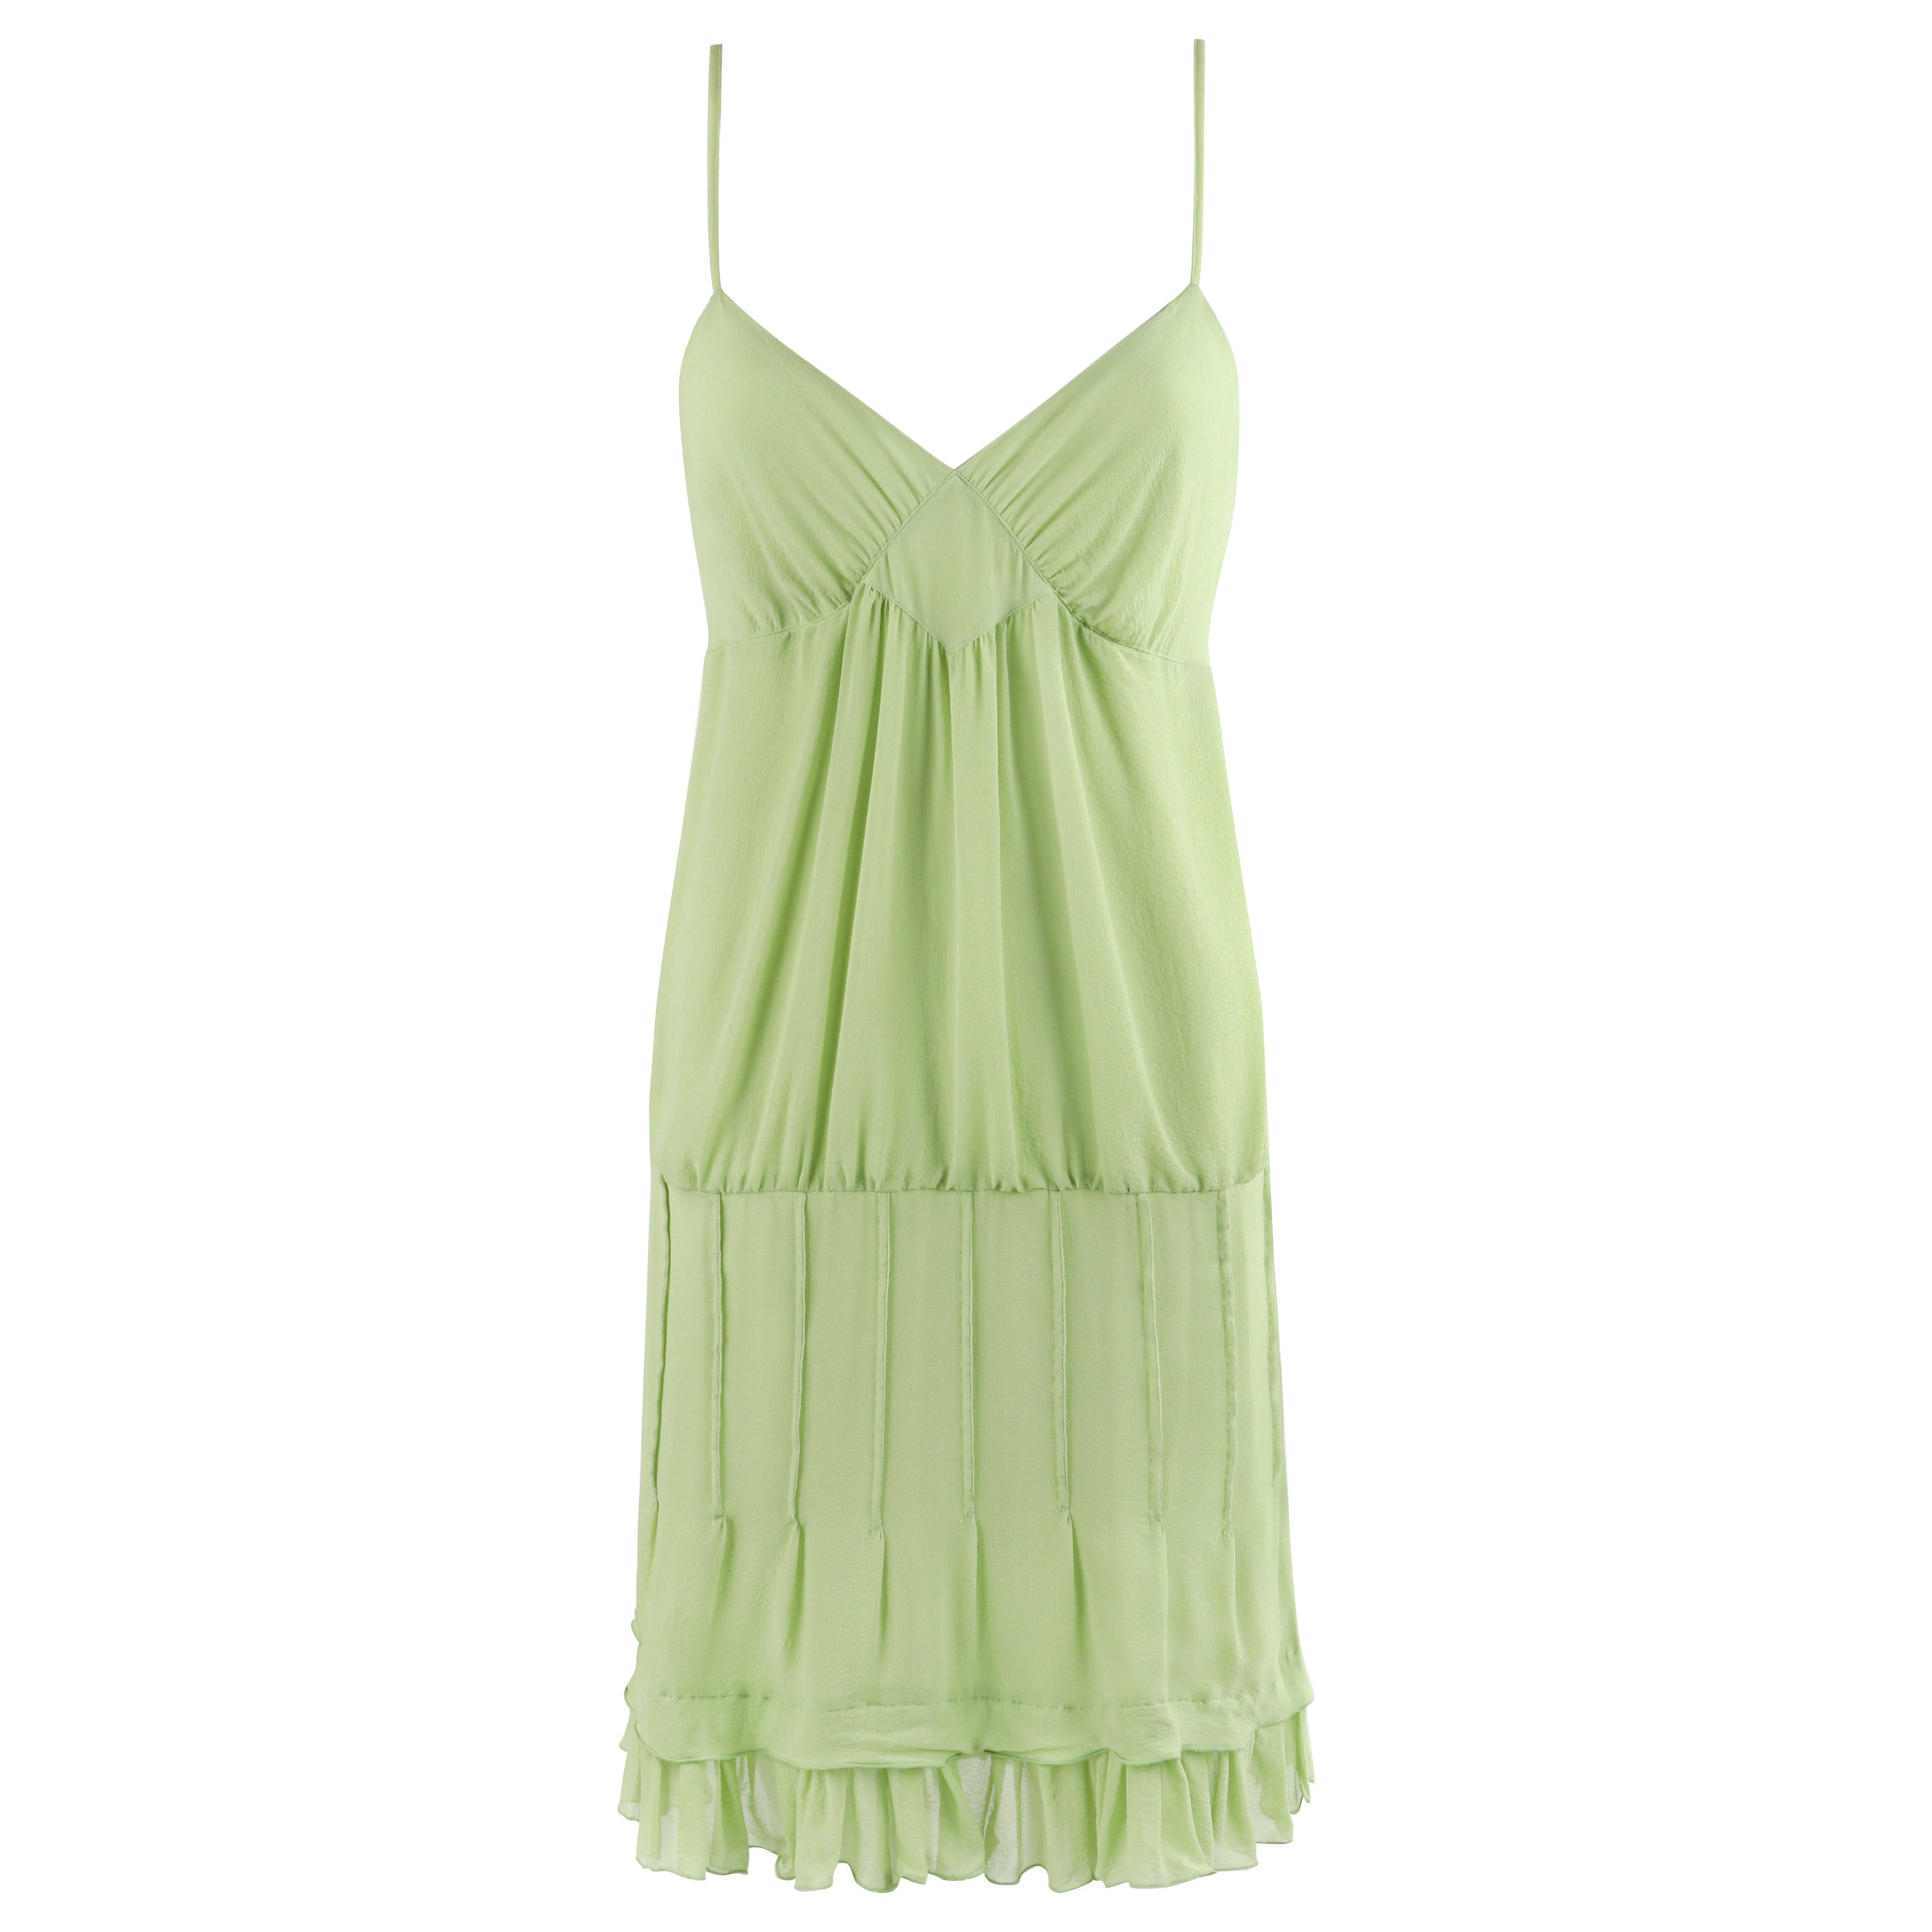 ALEXANDER MCQUEEN S/S 1996 Chartreuse Ruffled Tiered V-neck Pleated Sundress  For Sale